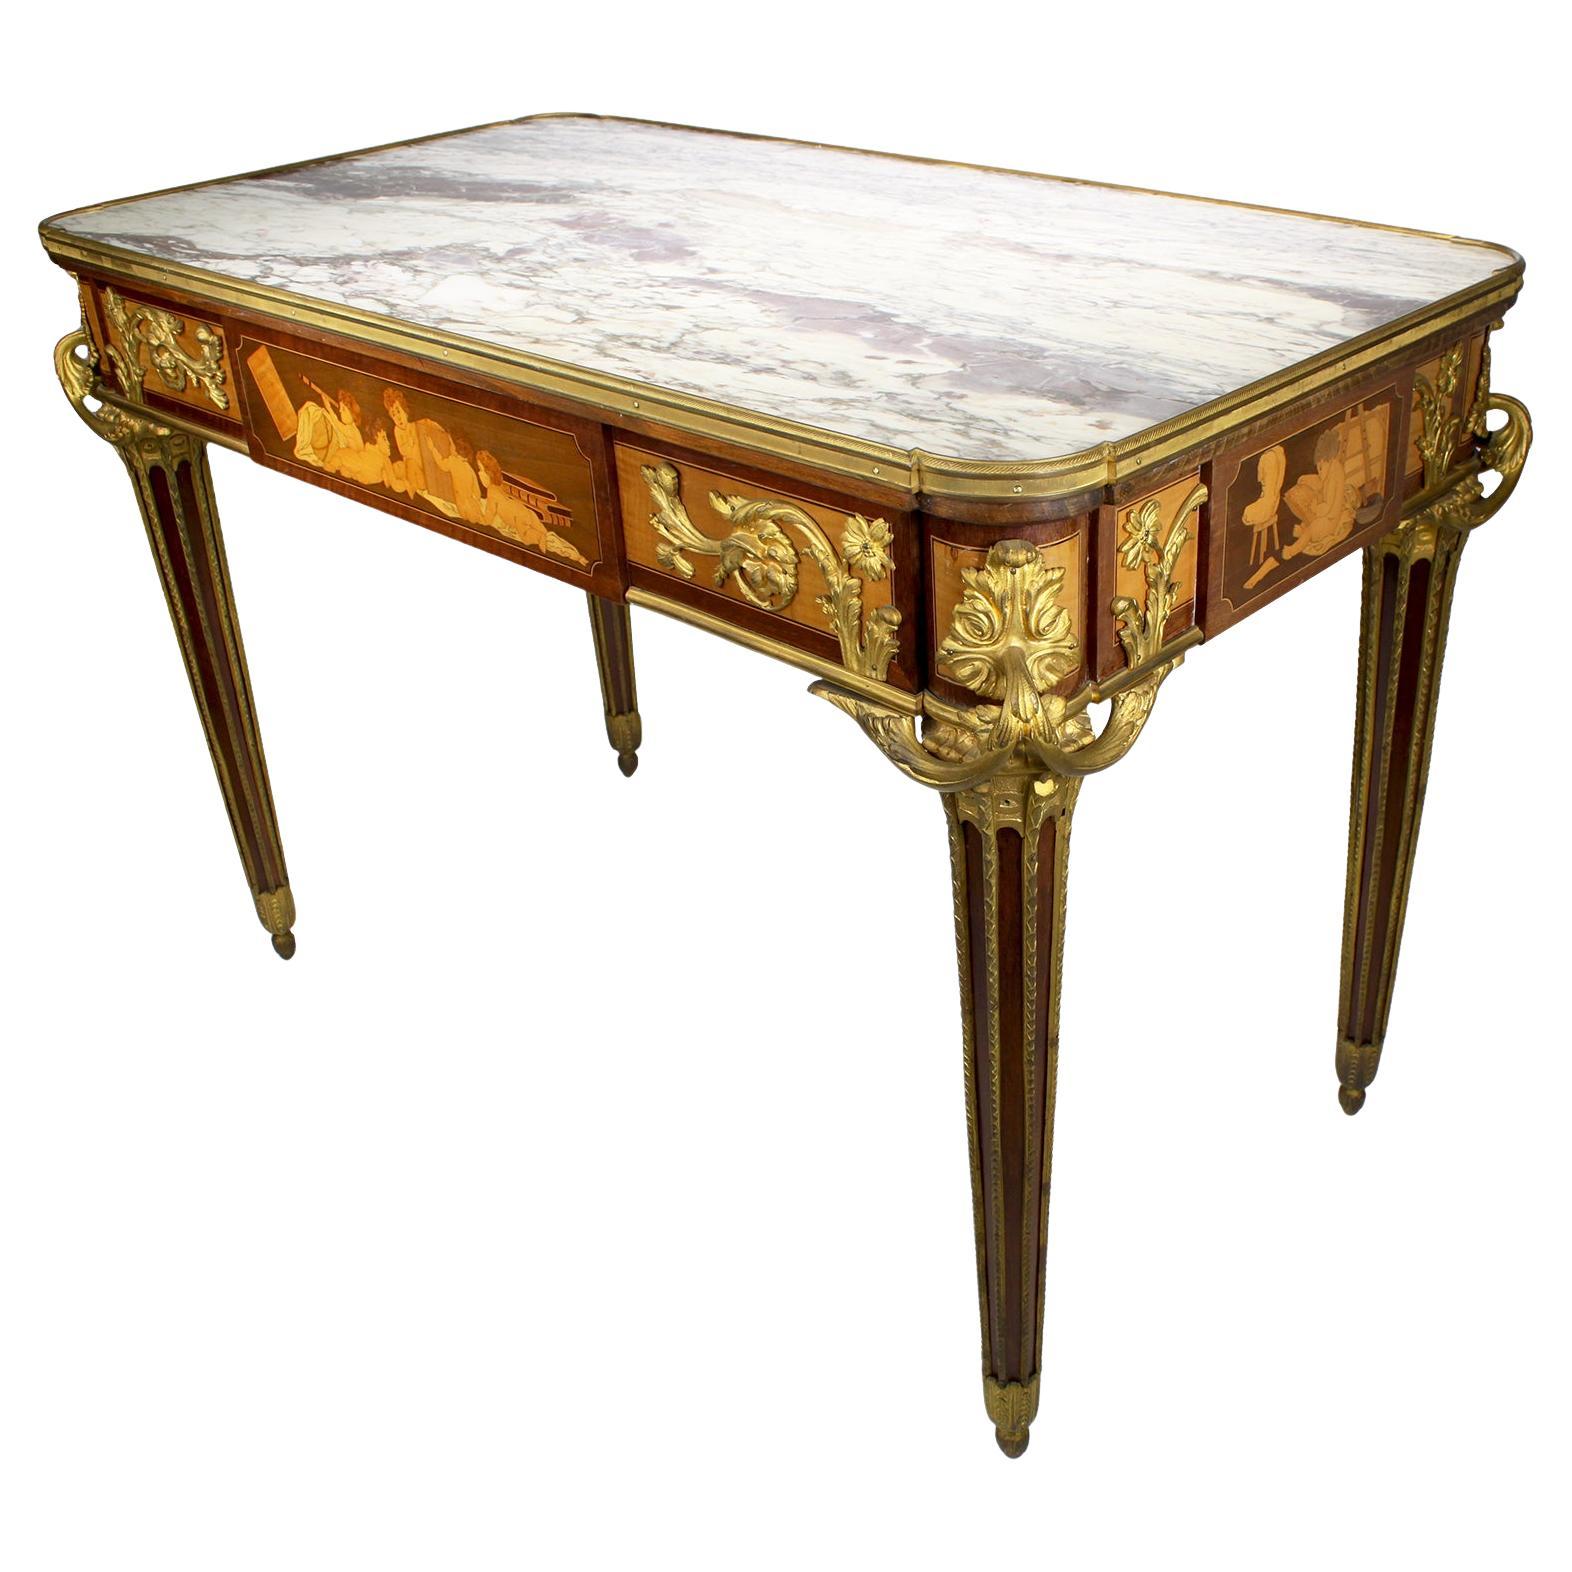 French Louis XVI Style Ormolu and Marquetry Center Table, François Linke Attr.